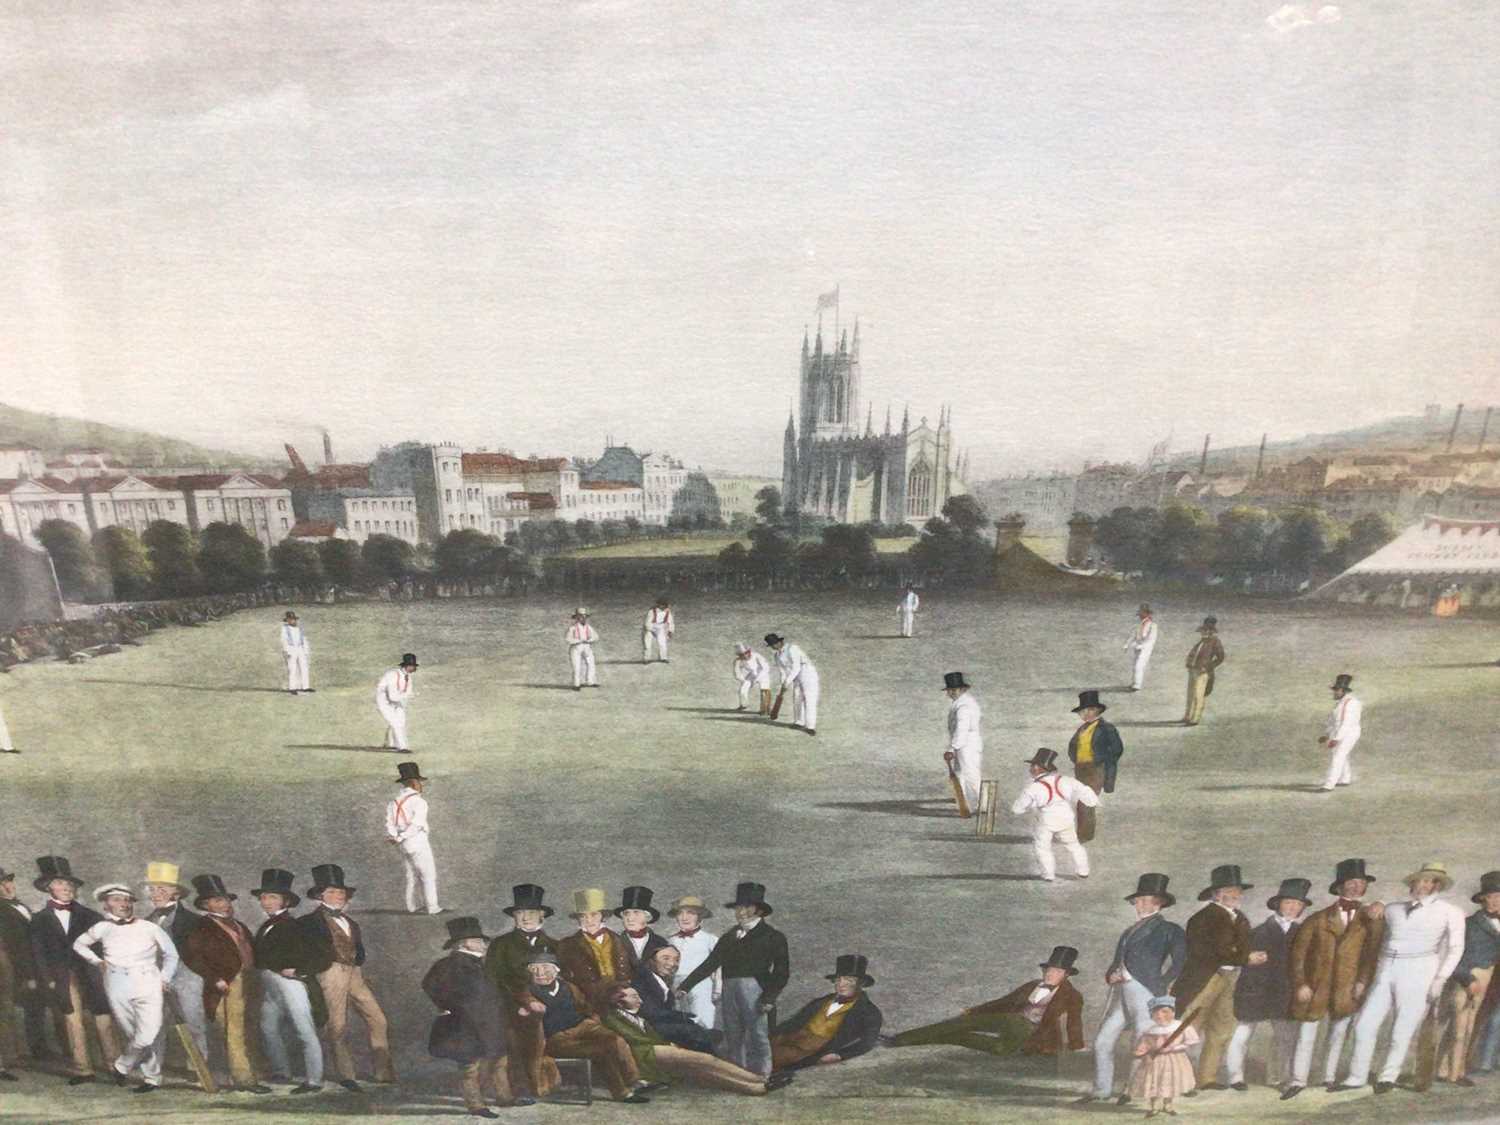 Lot 100 - 19th century-style coloured print - The Cricket Match between Sussex & Kent, at Brighton, 48cm x 66cm, in glazed gilt frame